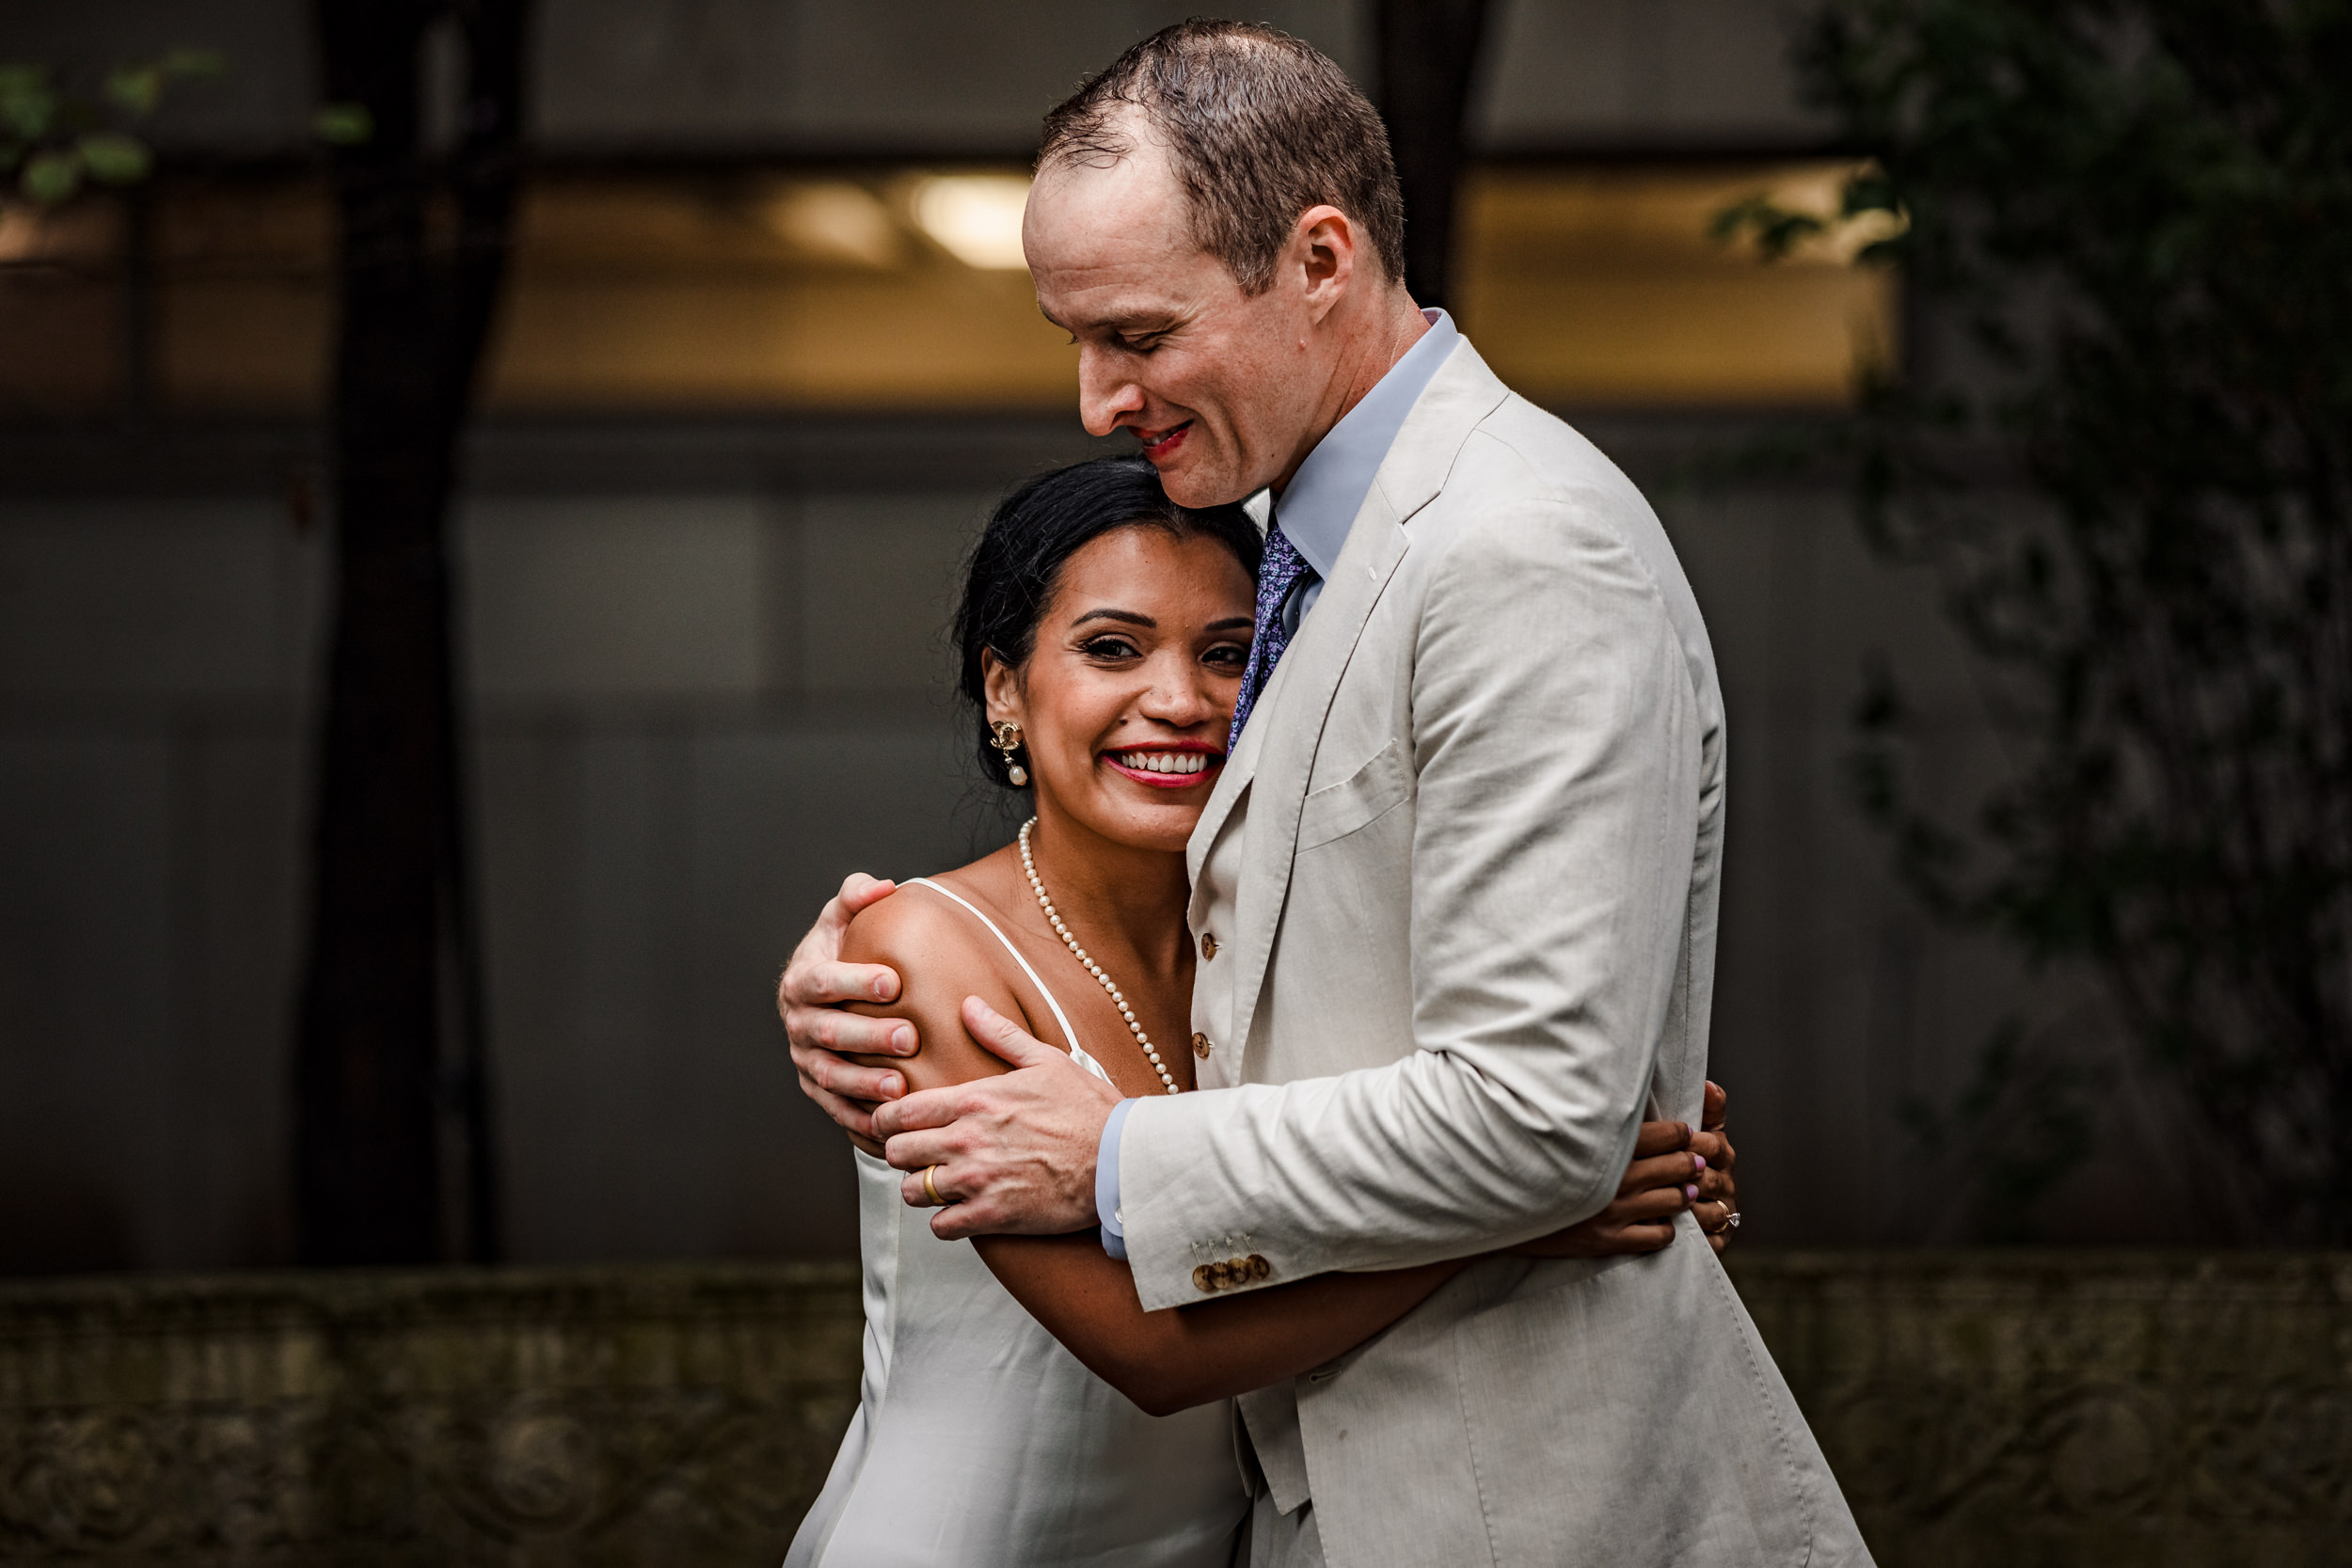 A couple shares their first dance together during a Shakespeare Garden micro wedding in Evanston.